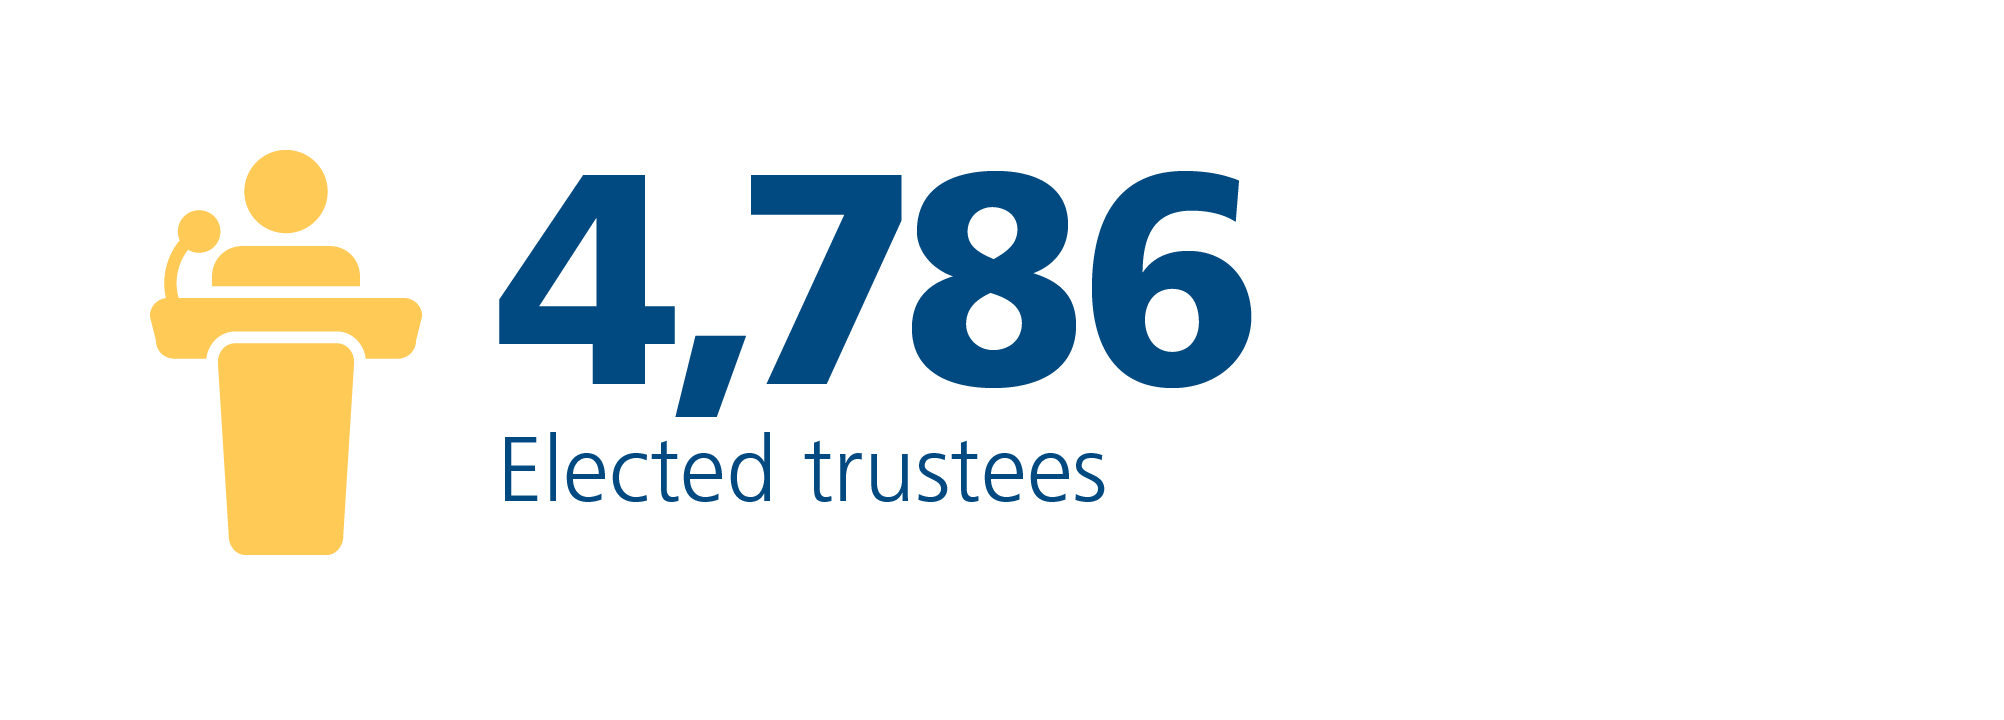 4,786 Elected trustees